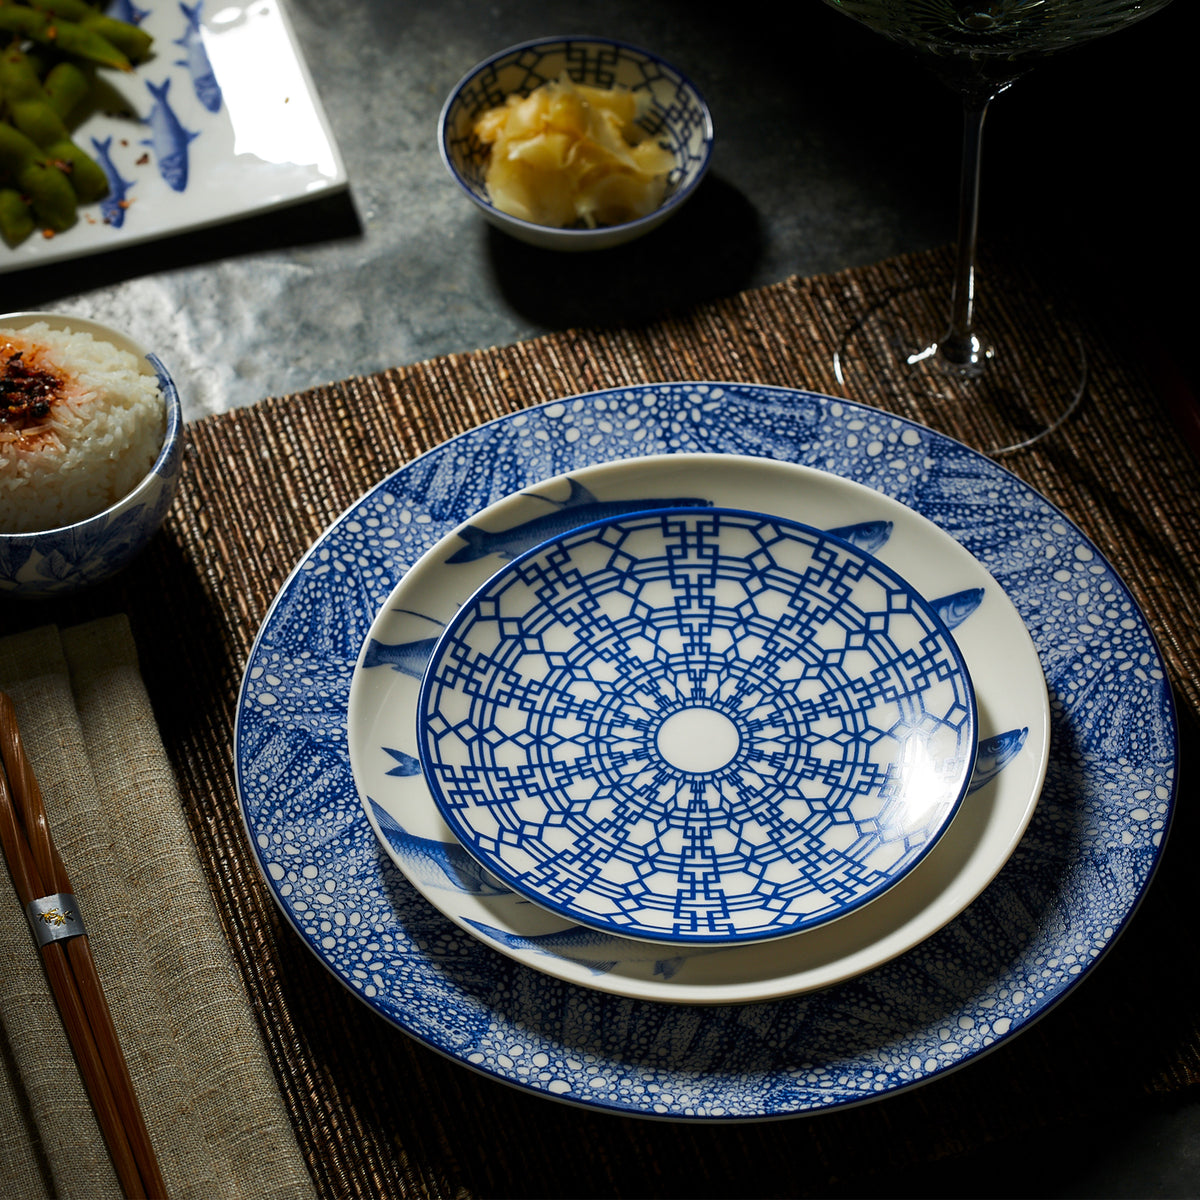 Newport Garden Gate blue and white premium porcelain canapé plate with Sea Fan Dinner plate and School of Fish Salad Plate, all from Caskata.